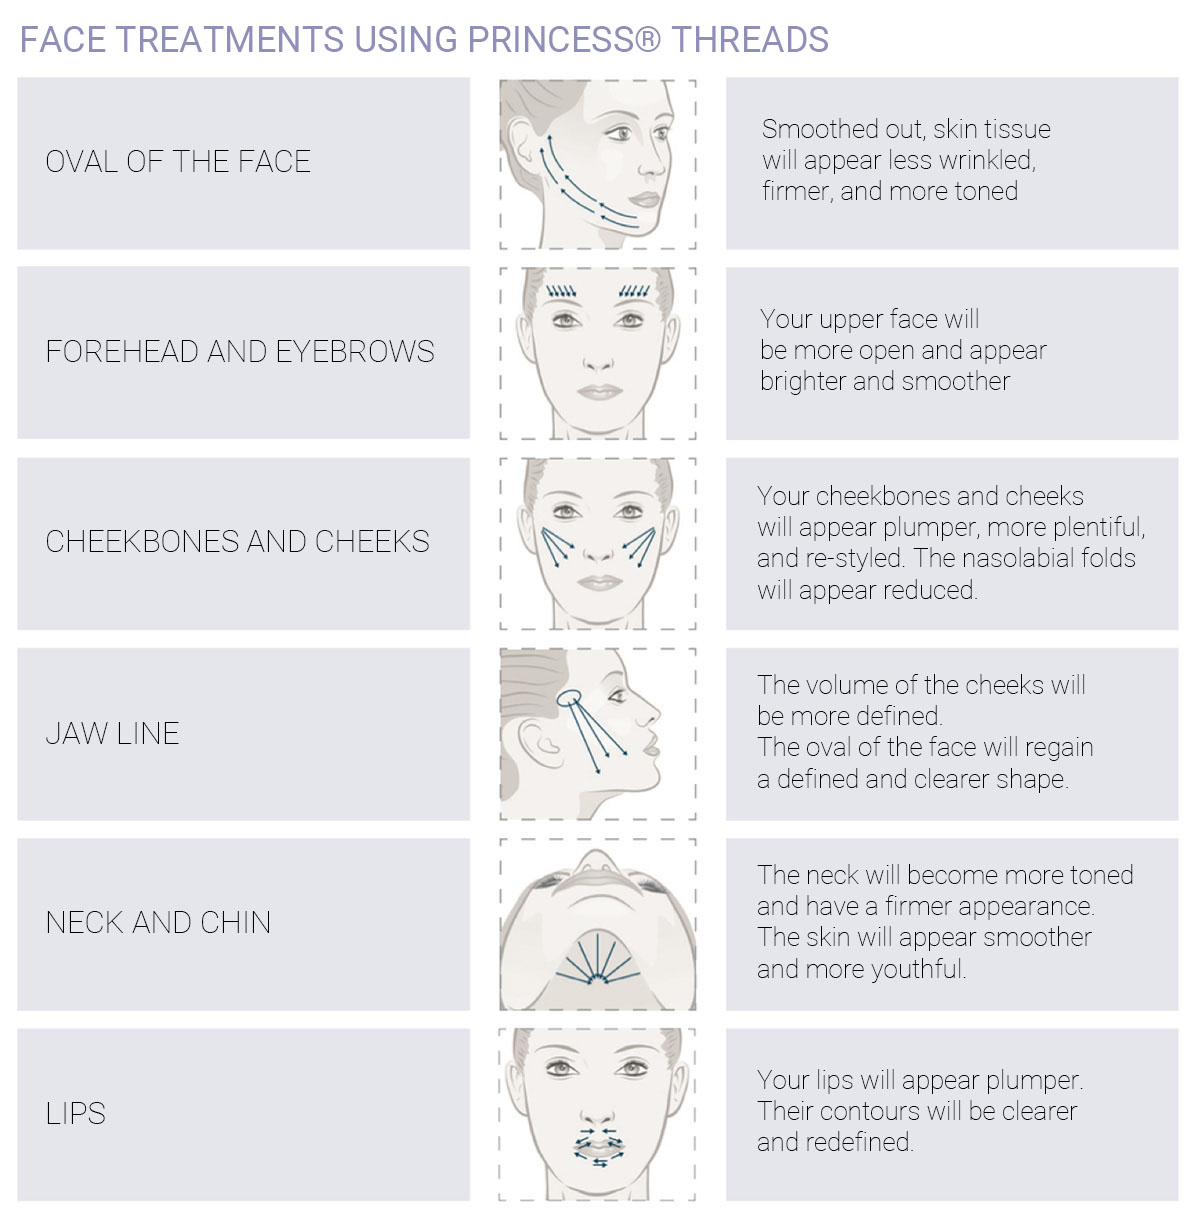 Face treatments using Princess threads